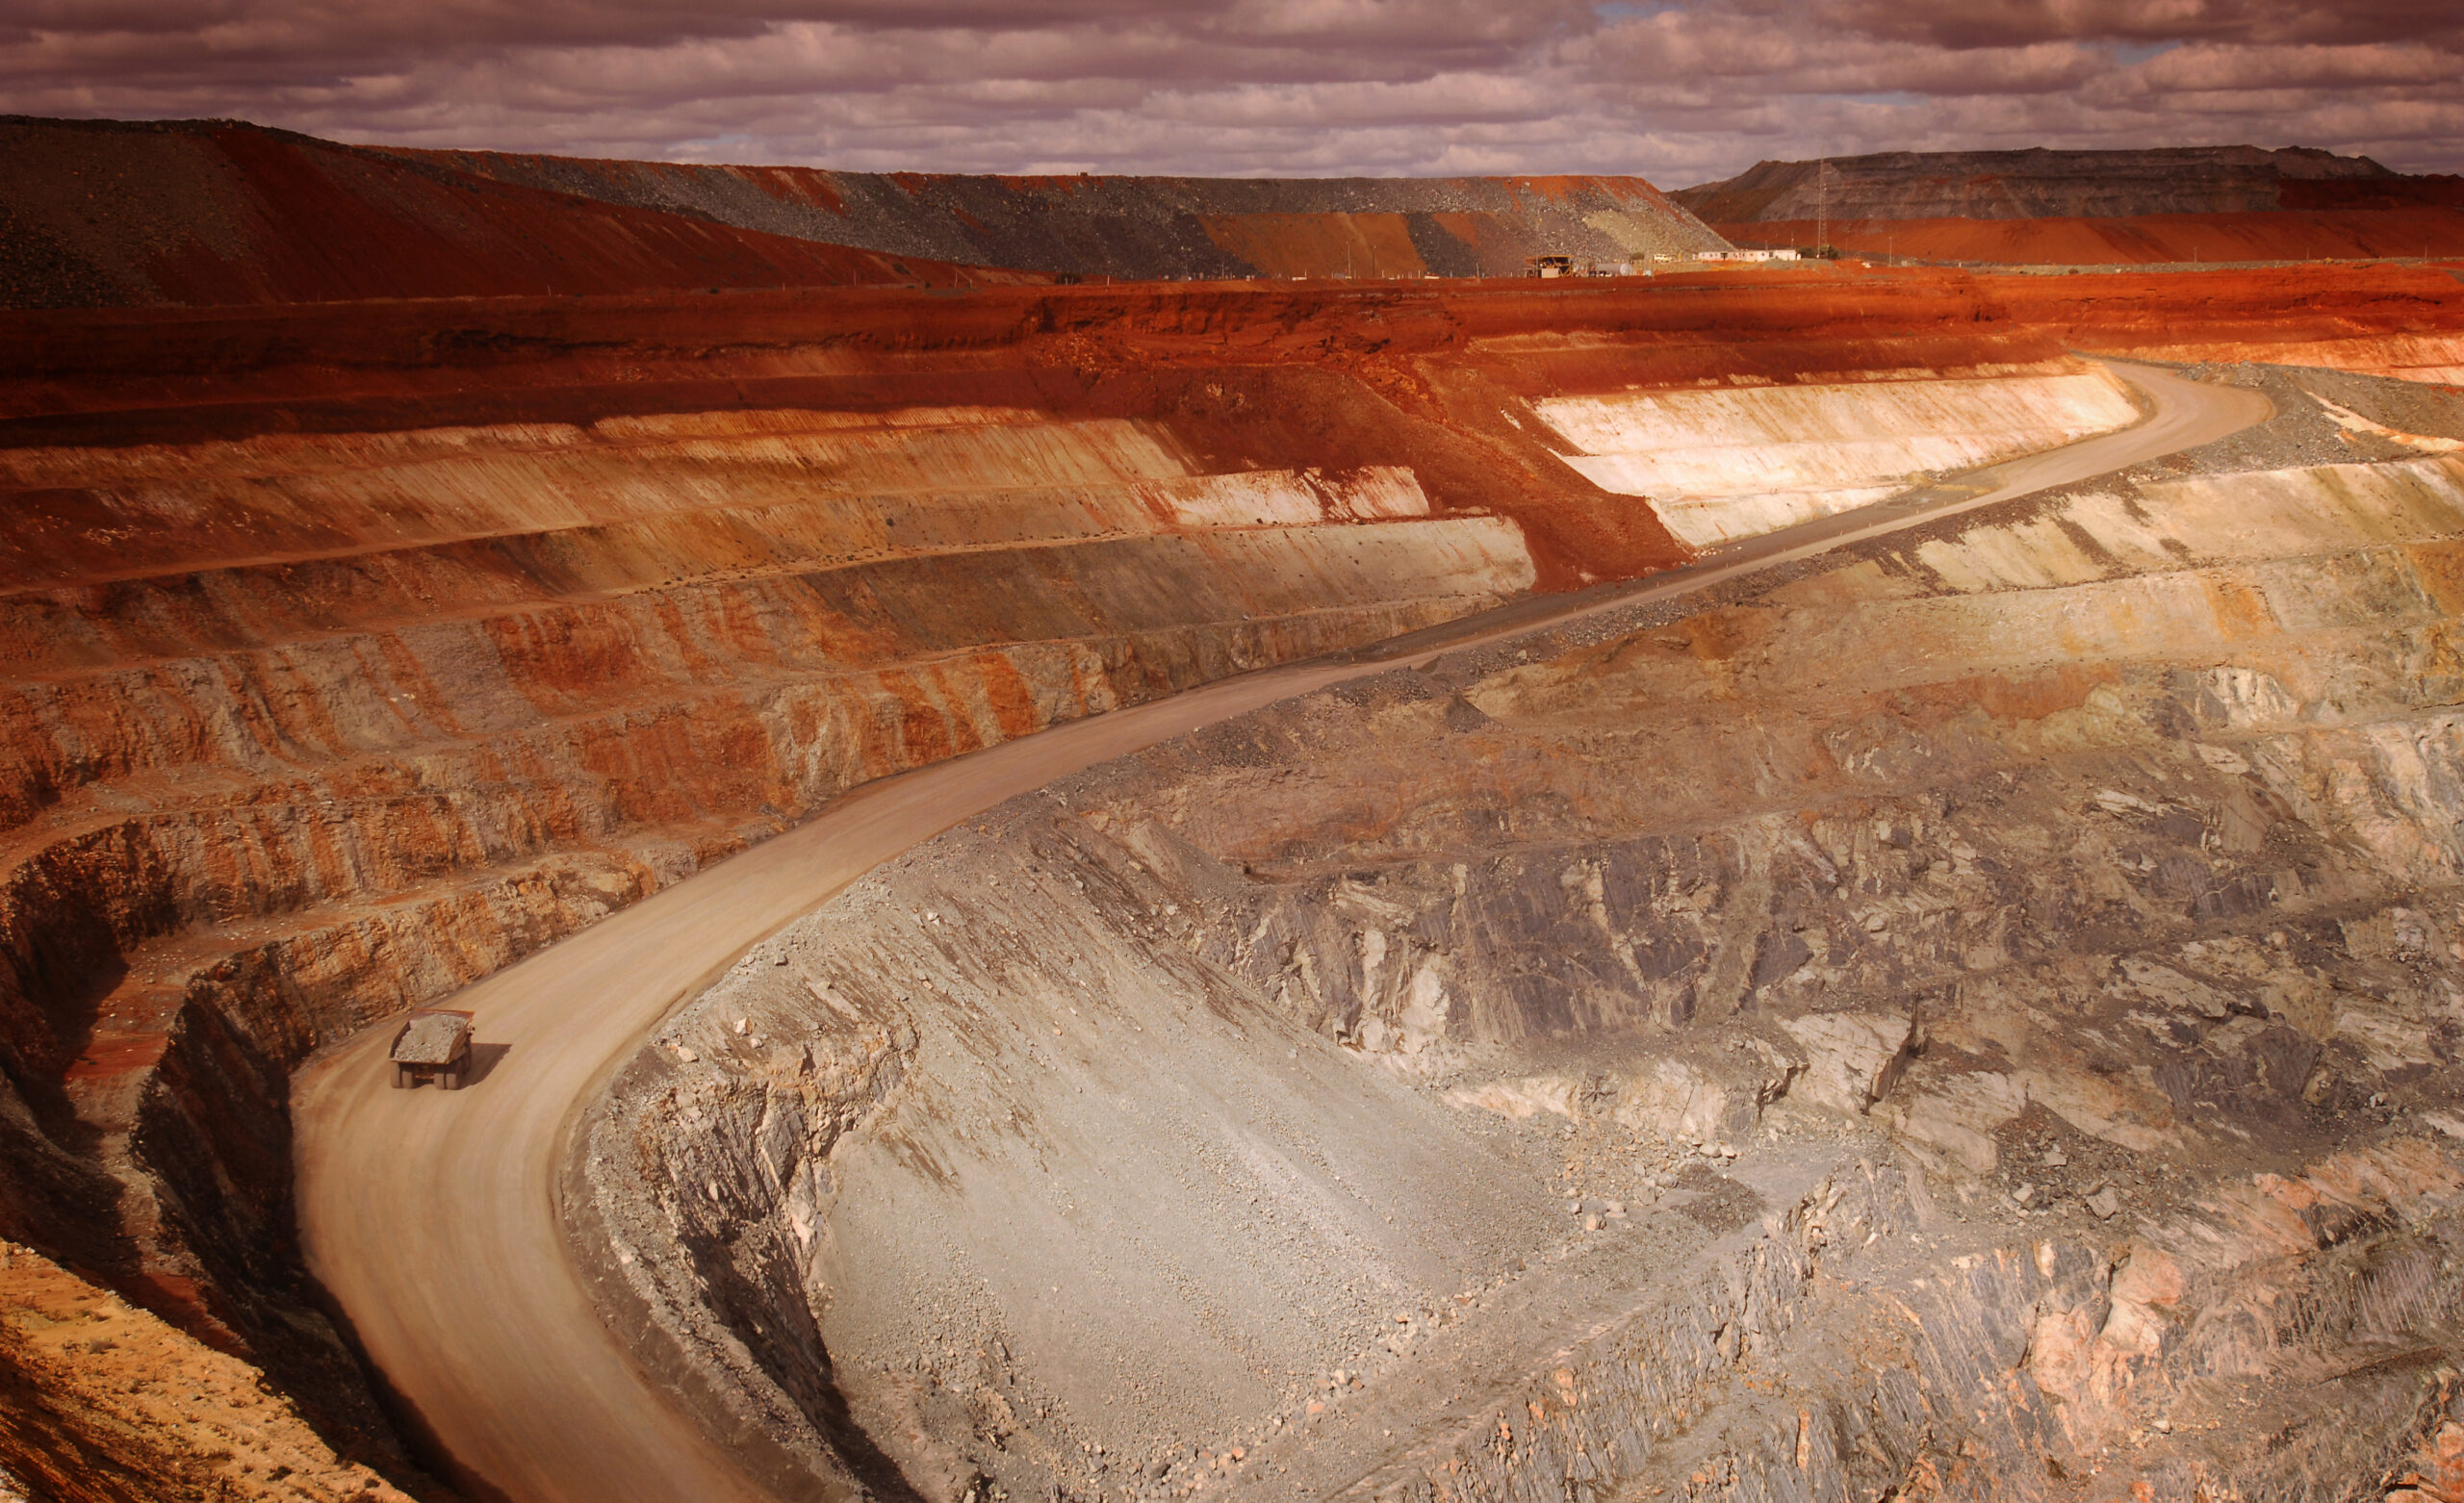 A wide angle elevated view of an open cut mine.  An excavator scoops up dirt and ore and is about to empty it into the rear tray of the haulage truck.